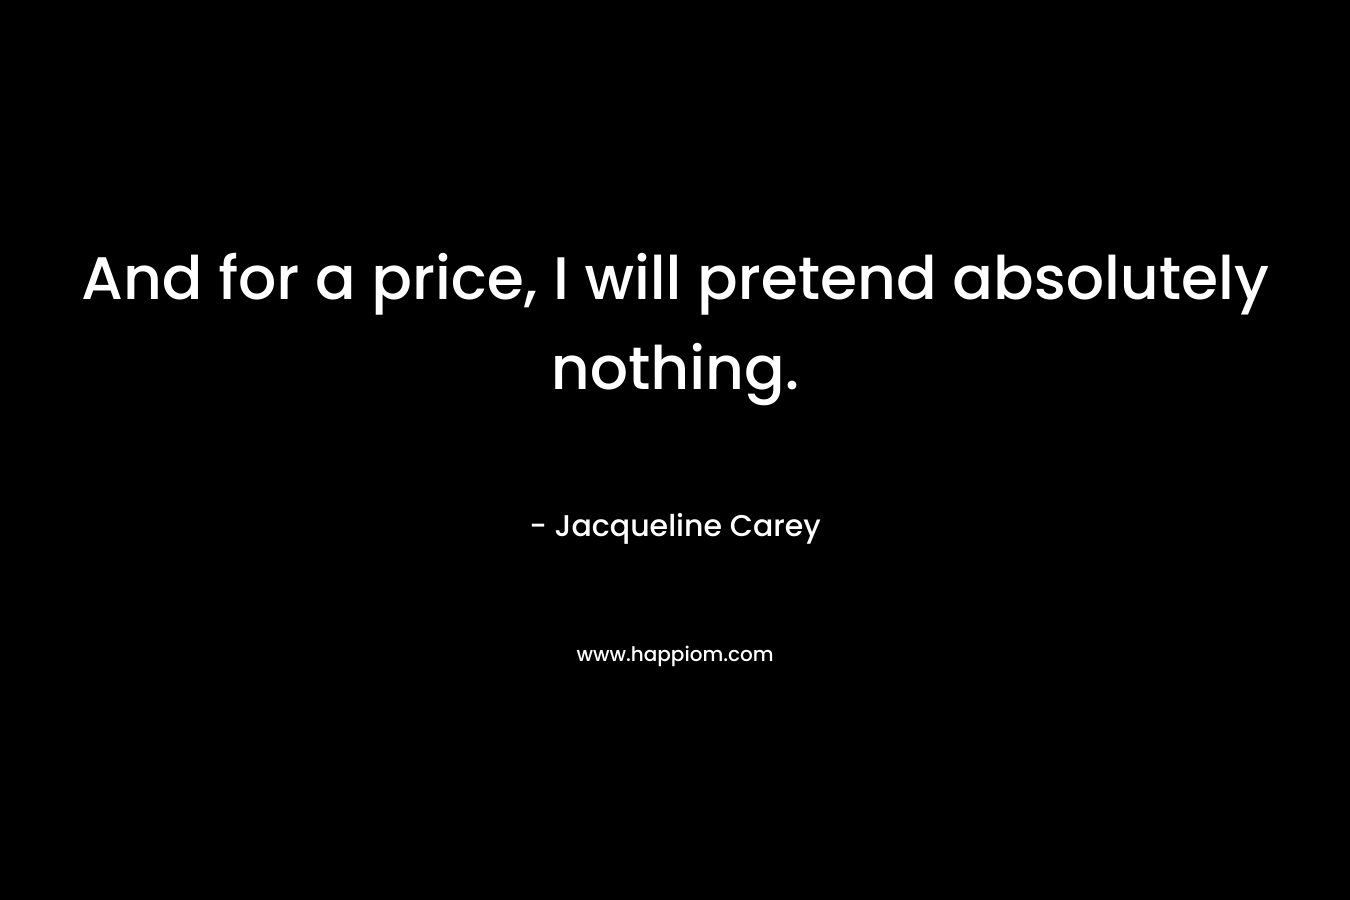 And for a price, I will pretend absolutely nothing.